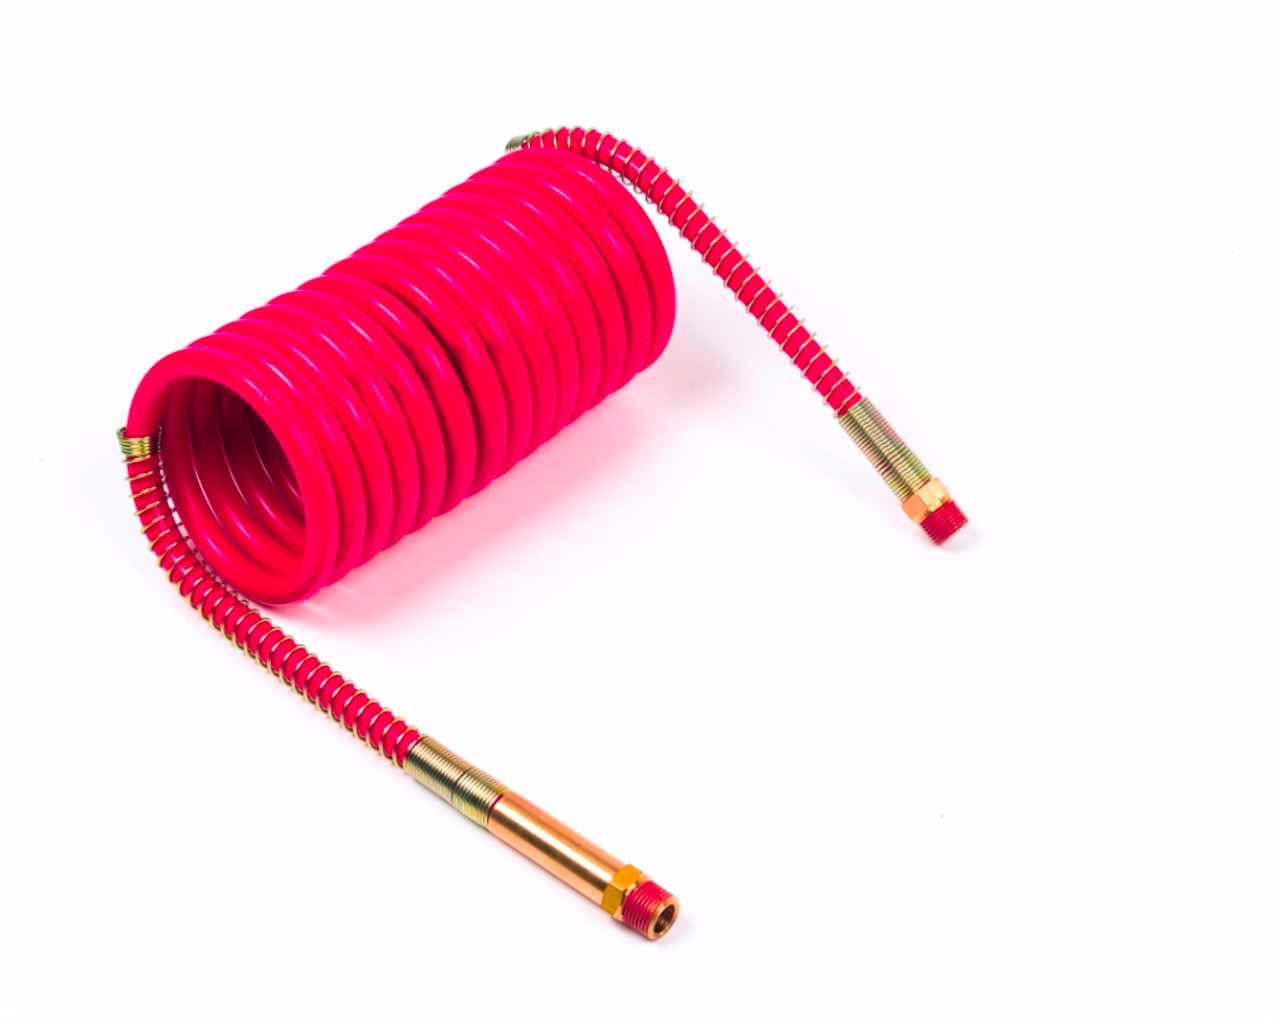 1/2" x 15' Red Low Temp Recoil Air Hose w/Male NPT Fittings  81-0015-RC